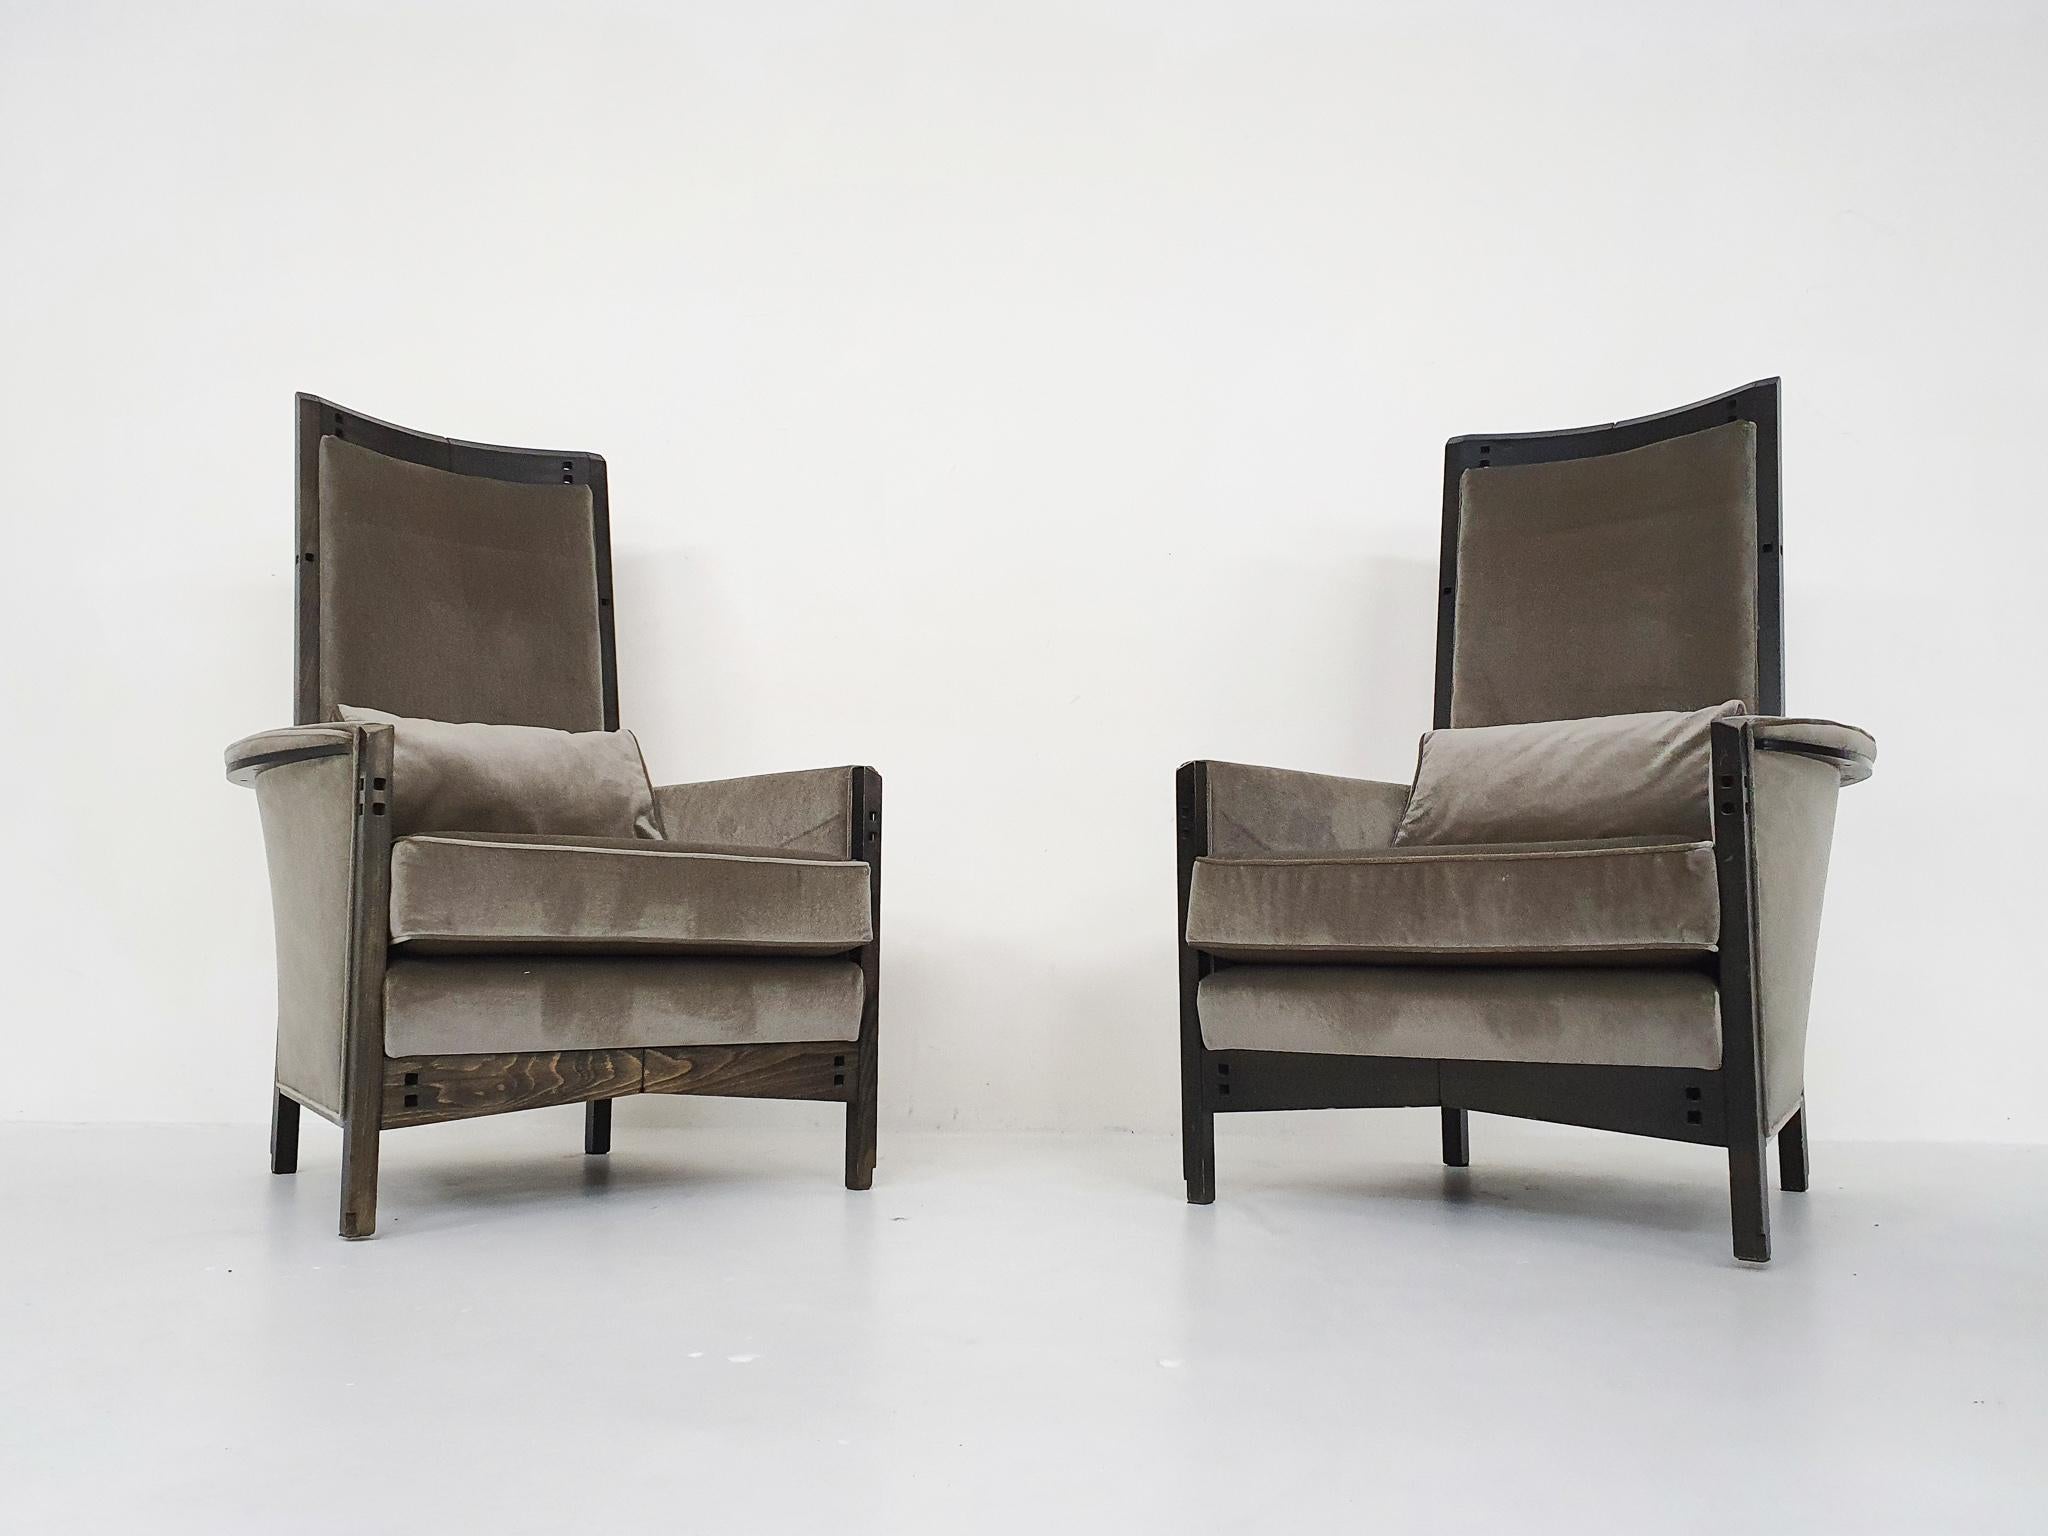 A pair of impressive lounge chairs with a “throne like” appearance, designed by Umberto Asnago for Giorgetti in the 1990’s.
The chairs are made of a wooden frame and new taupe velvet upholstery.